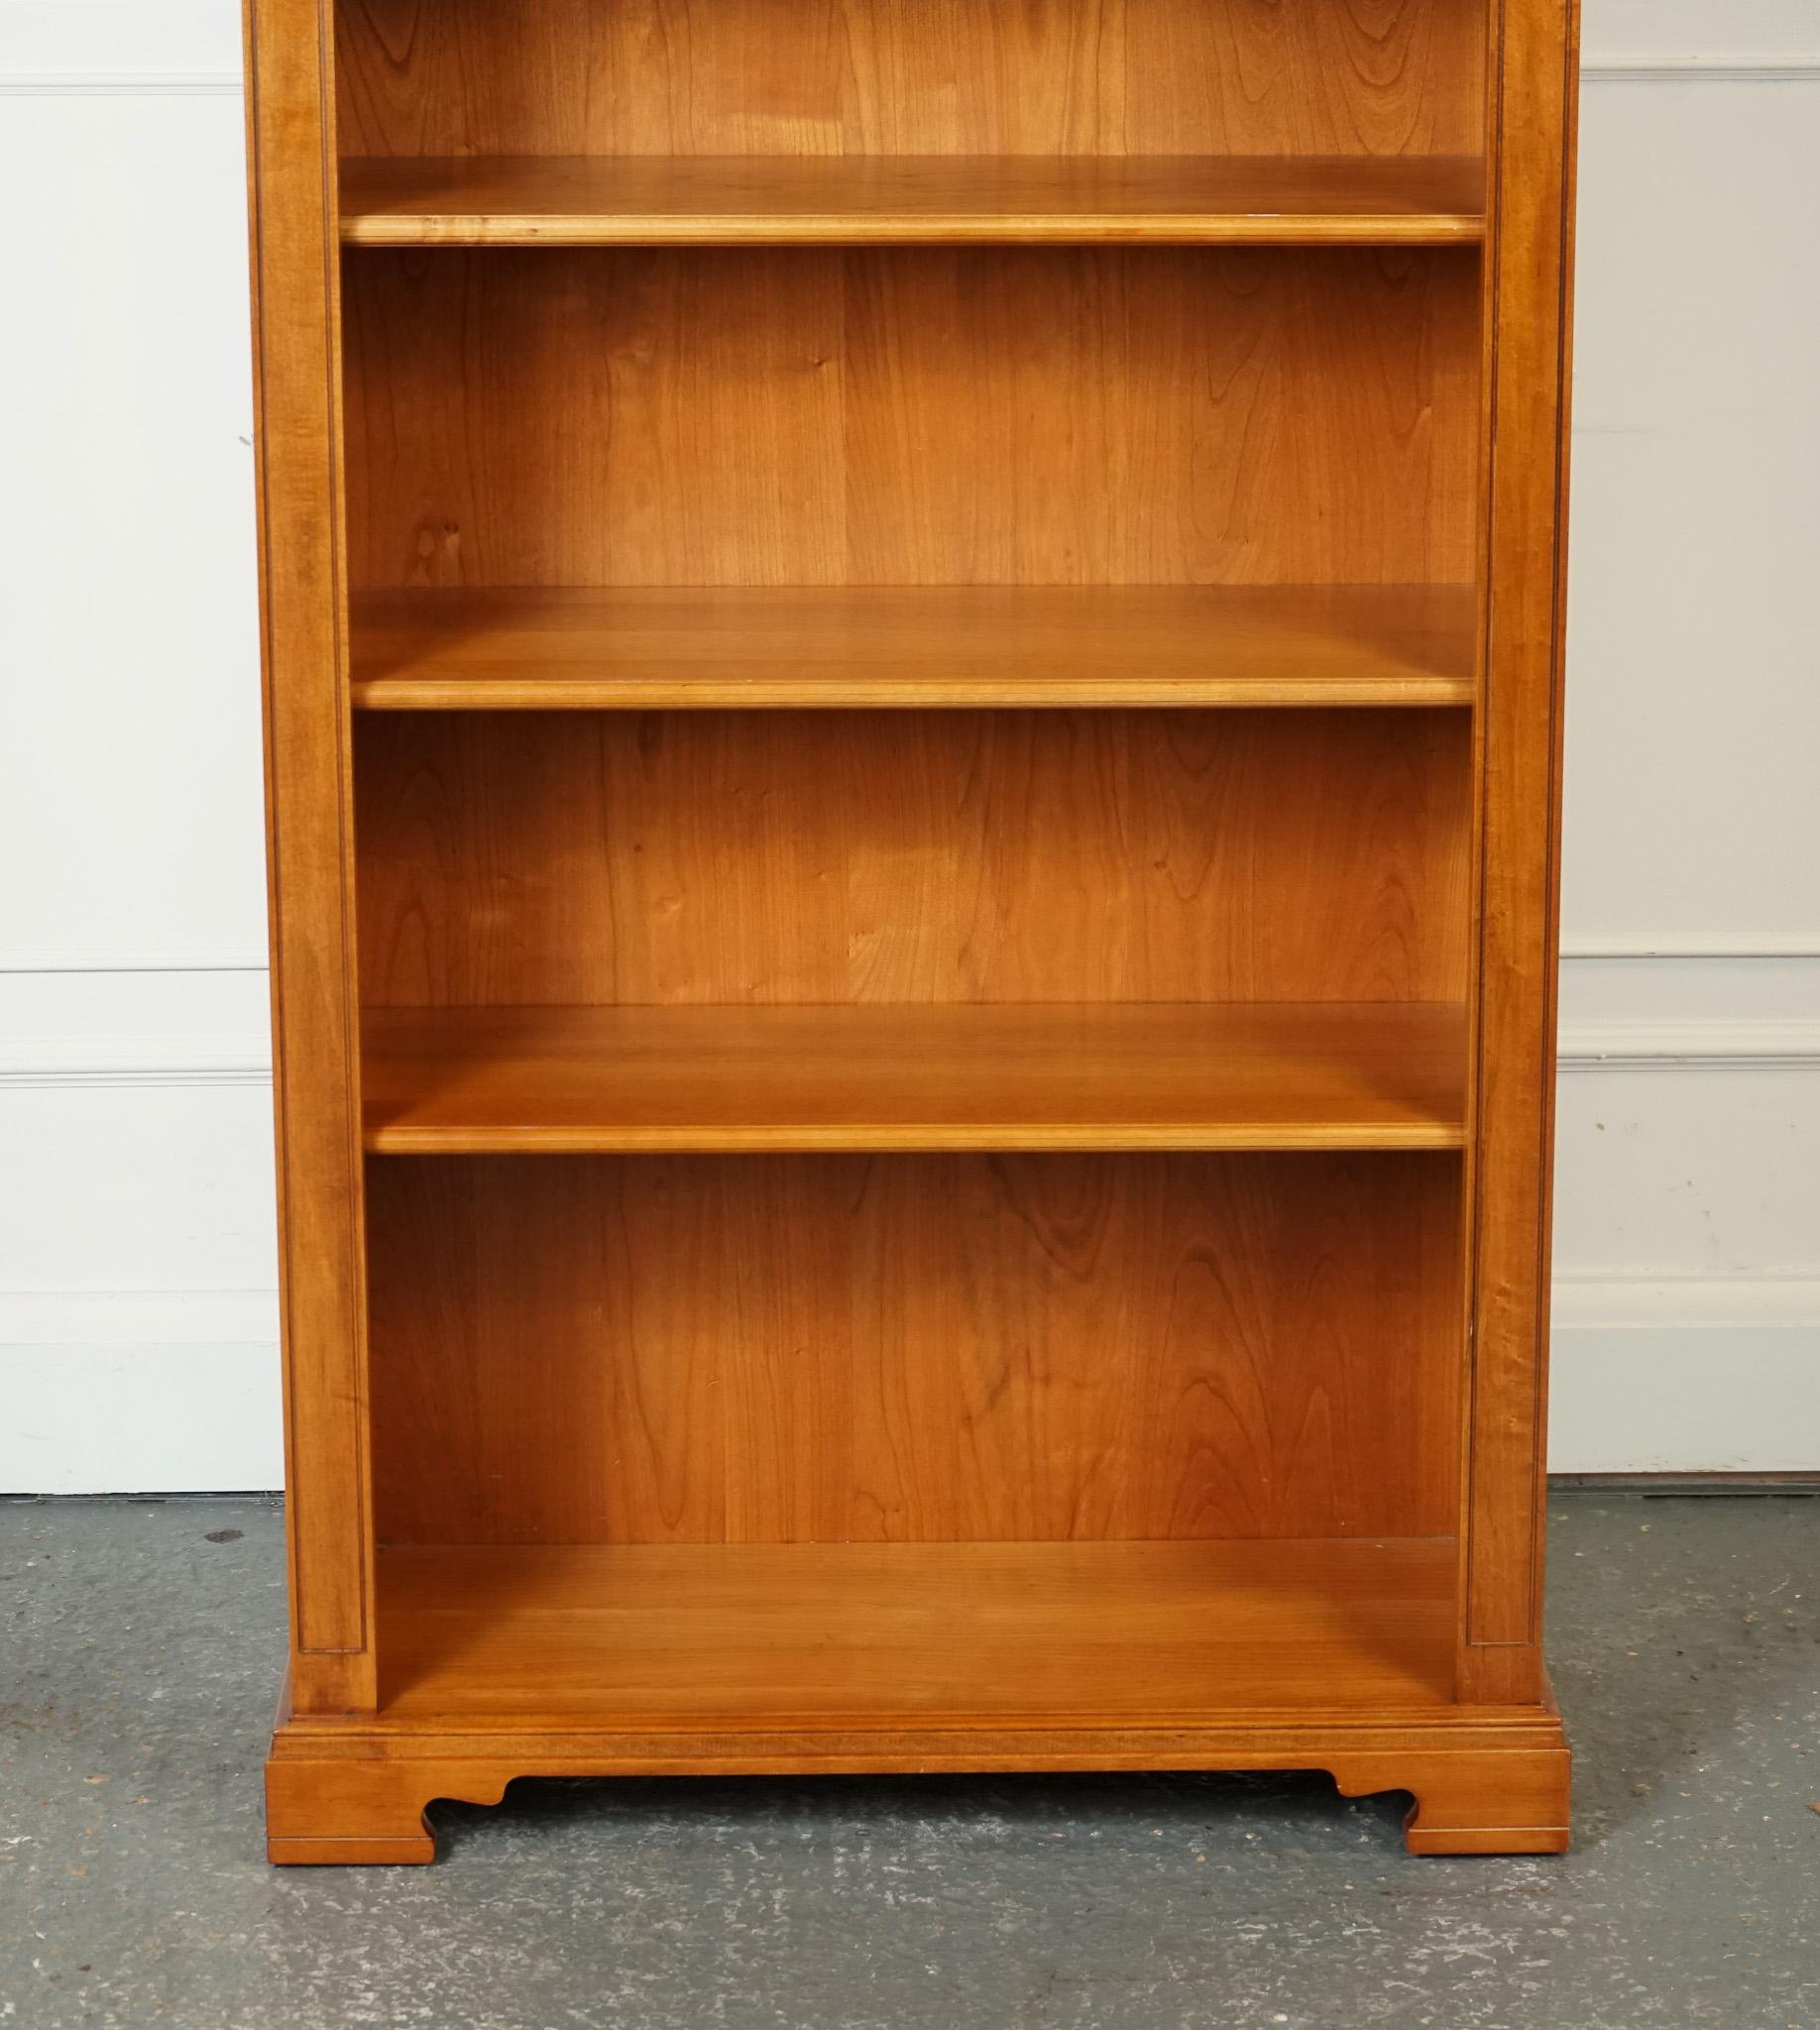 Oak VINTAGE TALL OPEN SOLID BOOKCASE 5 SHELVES MADE BY YOUNGER FURNITURE LONDON j1 For Sale